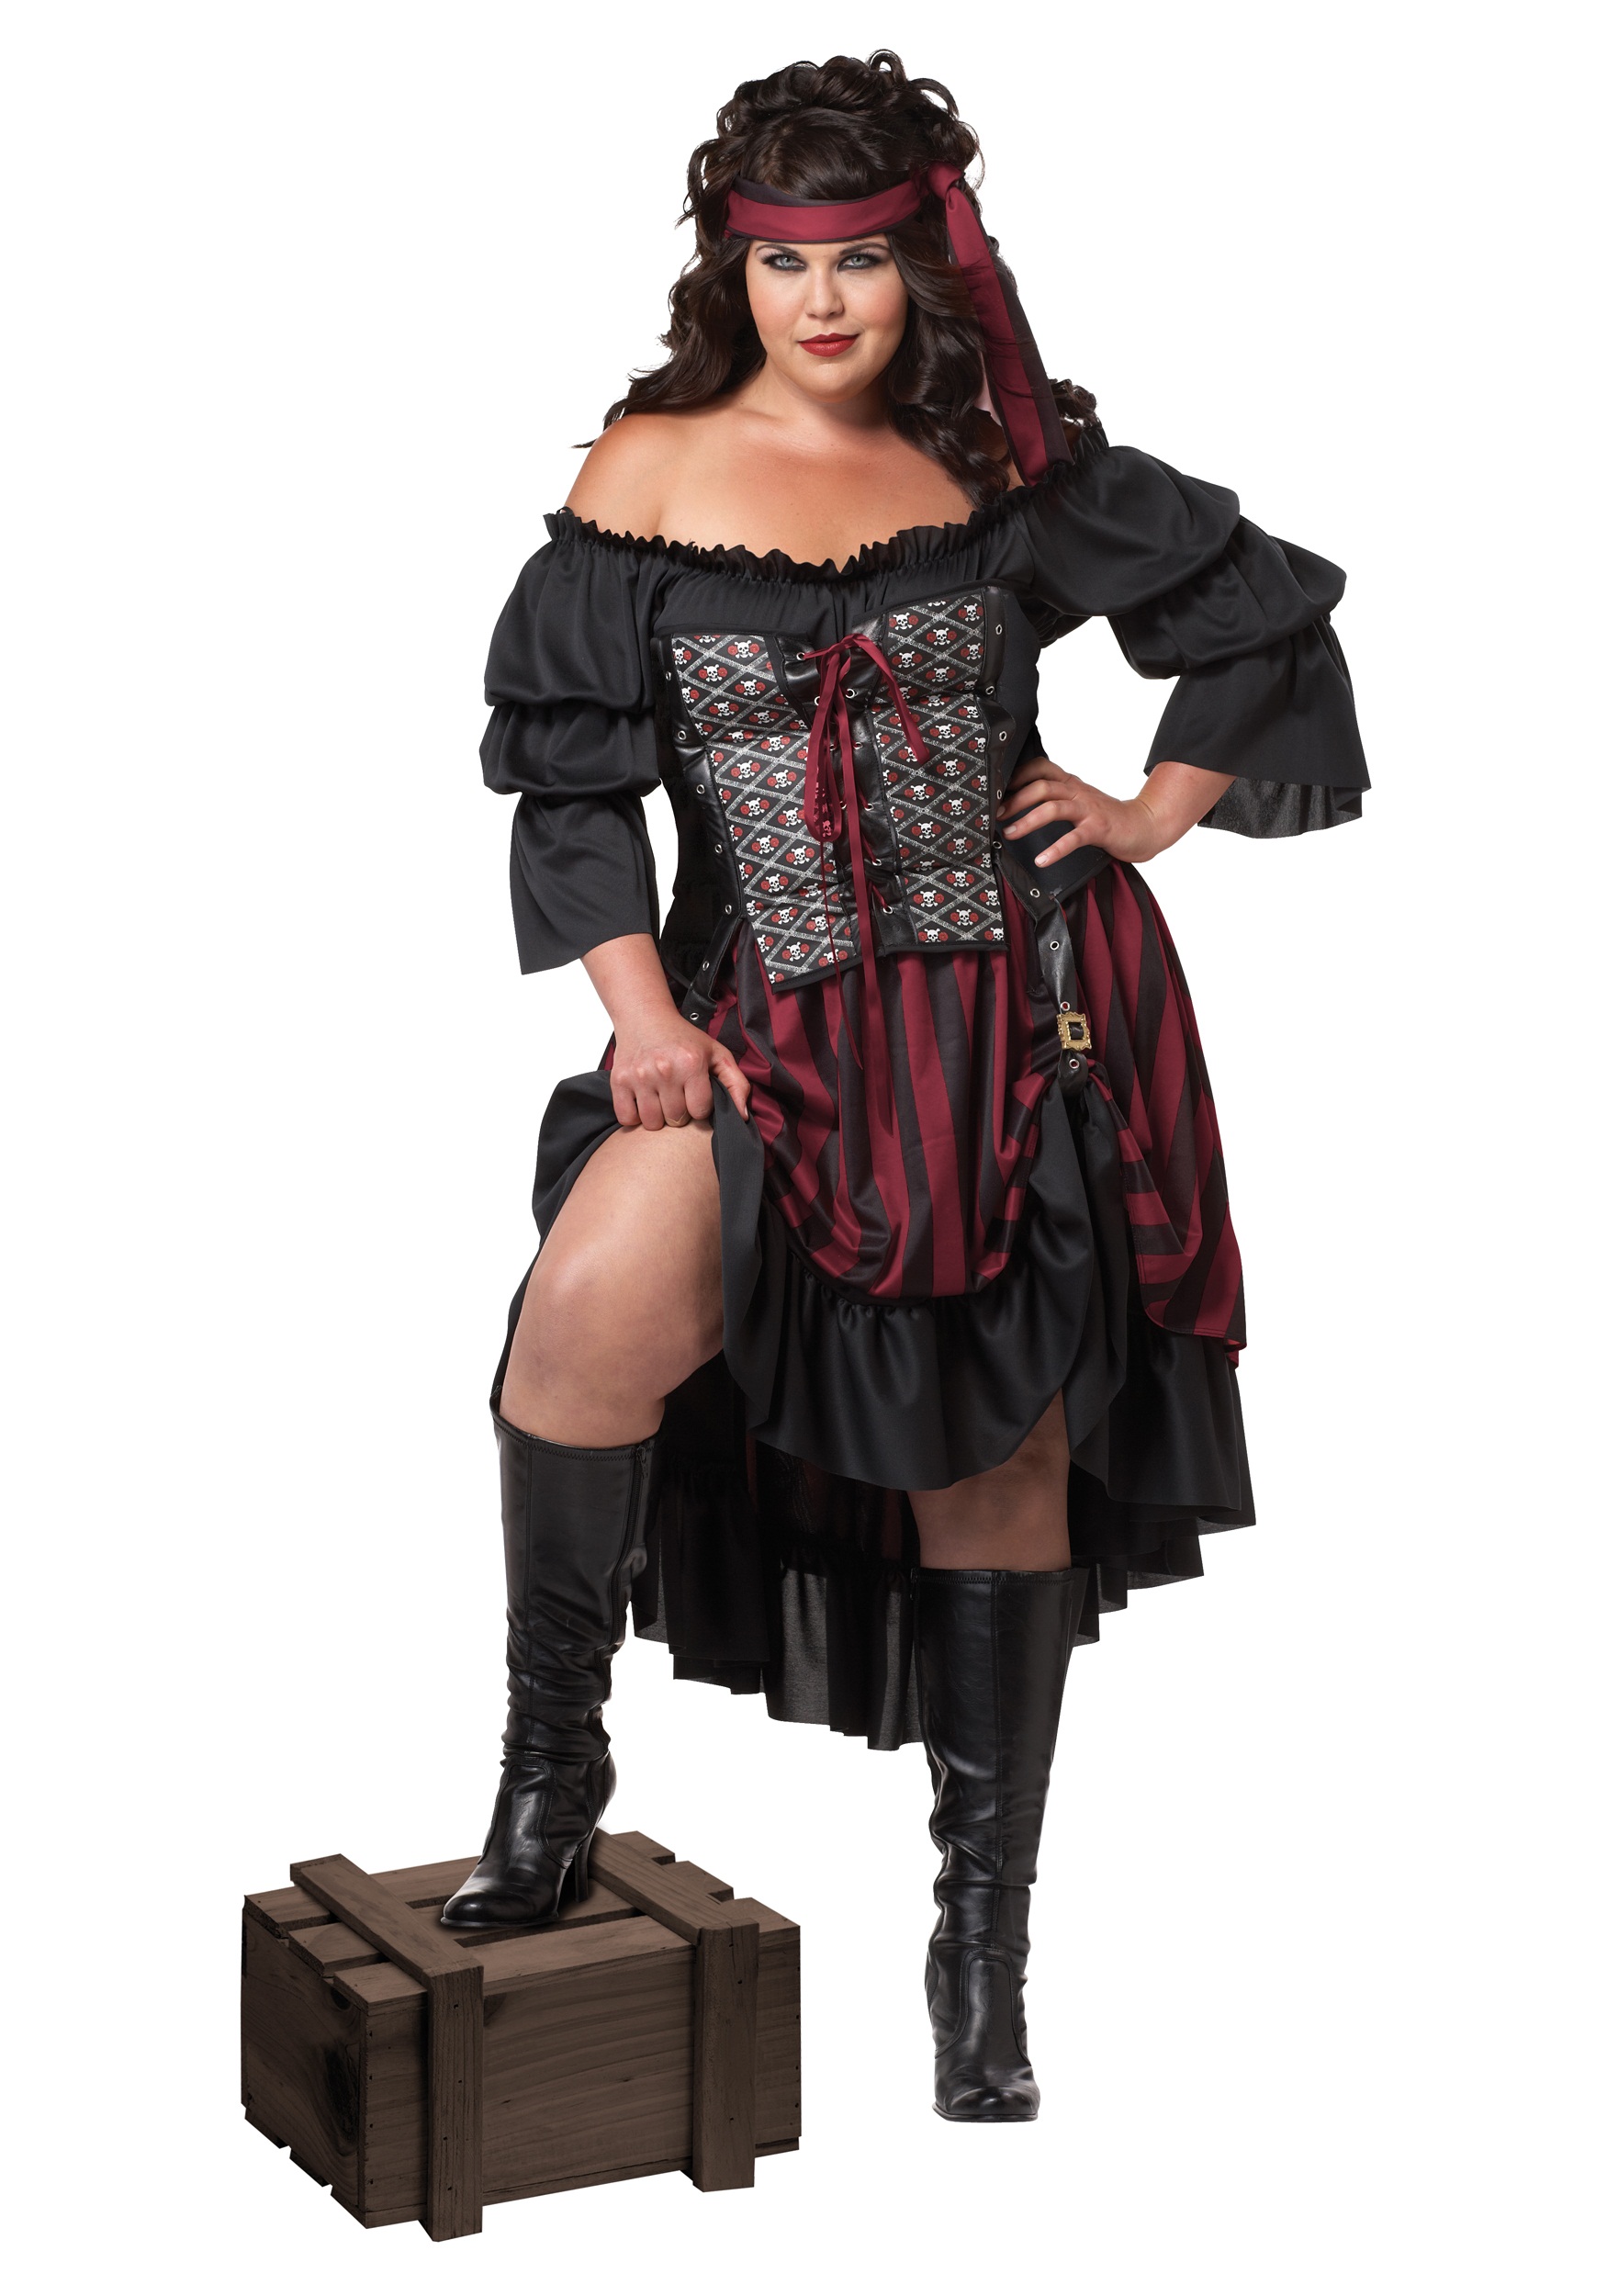 Plus Size Pirate Wench Costume Womens Pirate Halloween Costume 0784